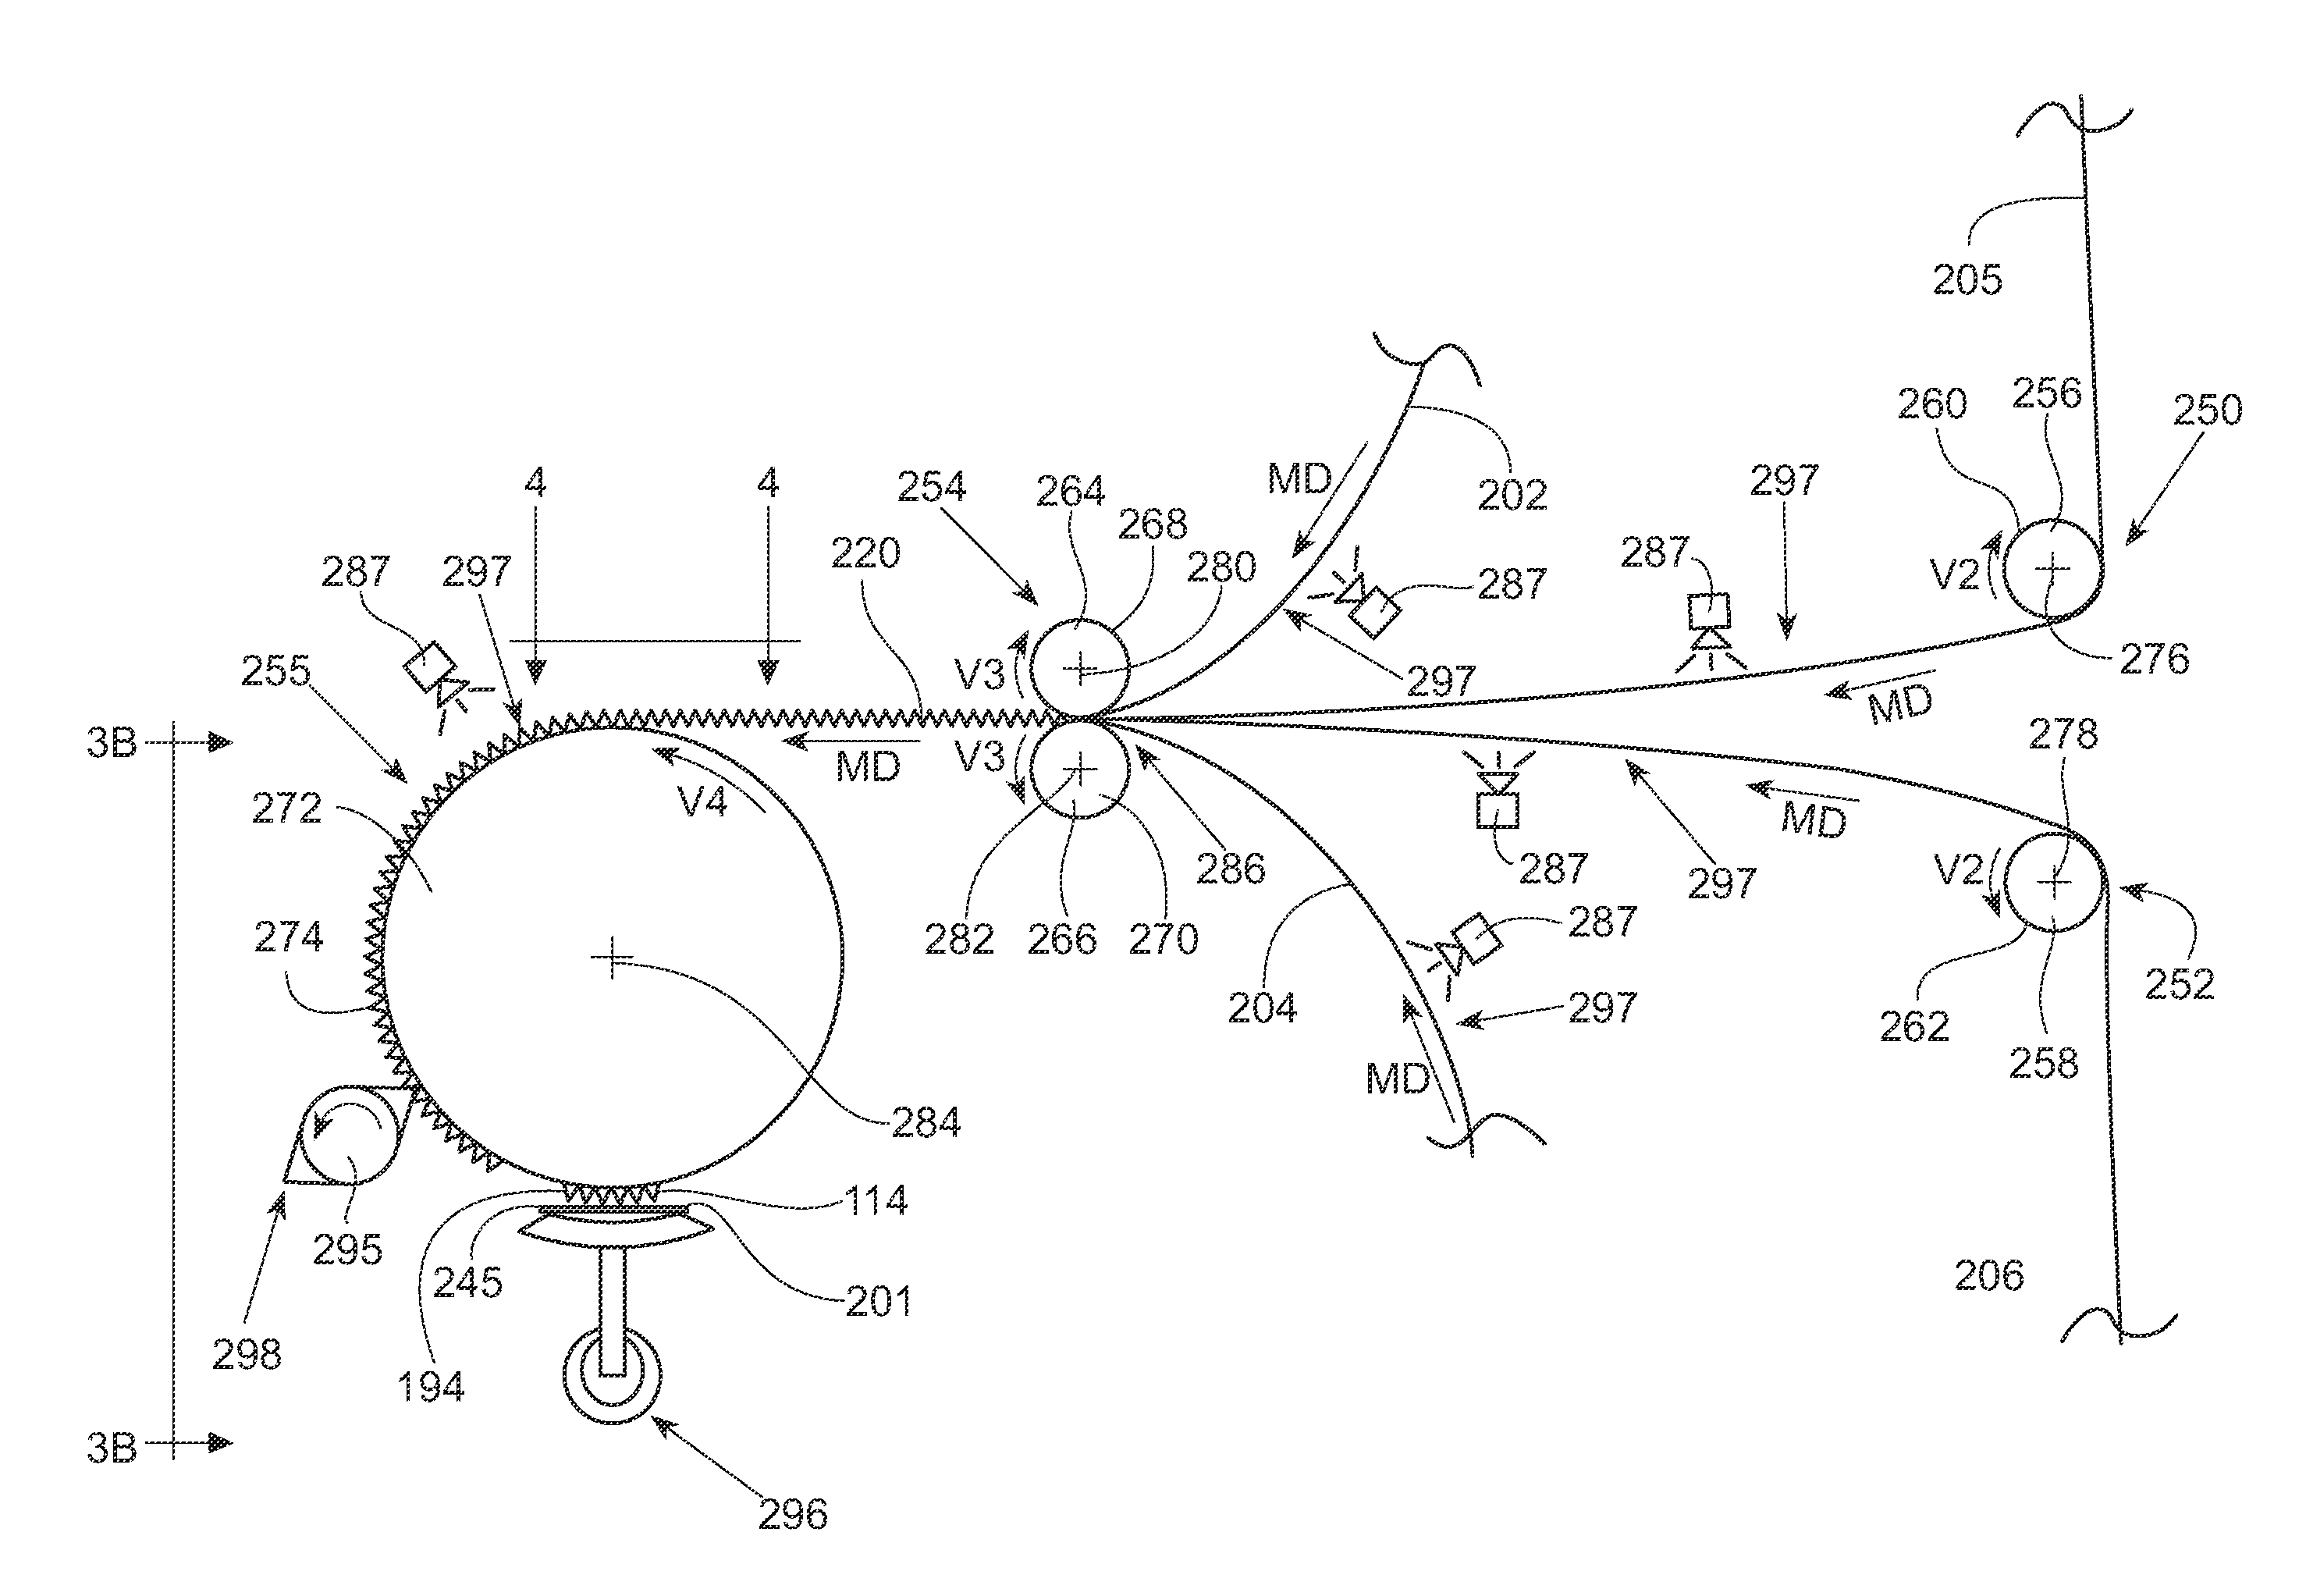 Apparatus and Method for Making a Layered Elastic Substrate